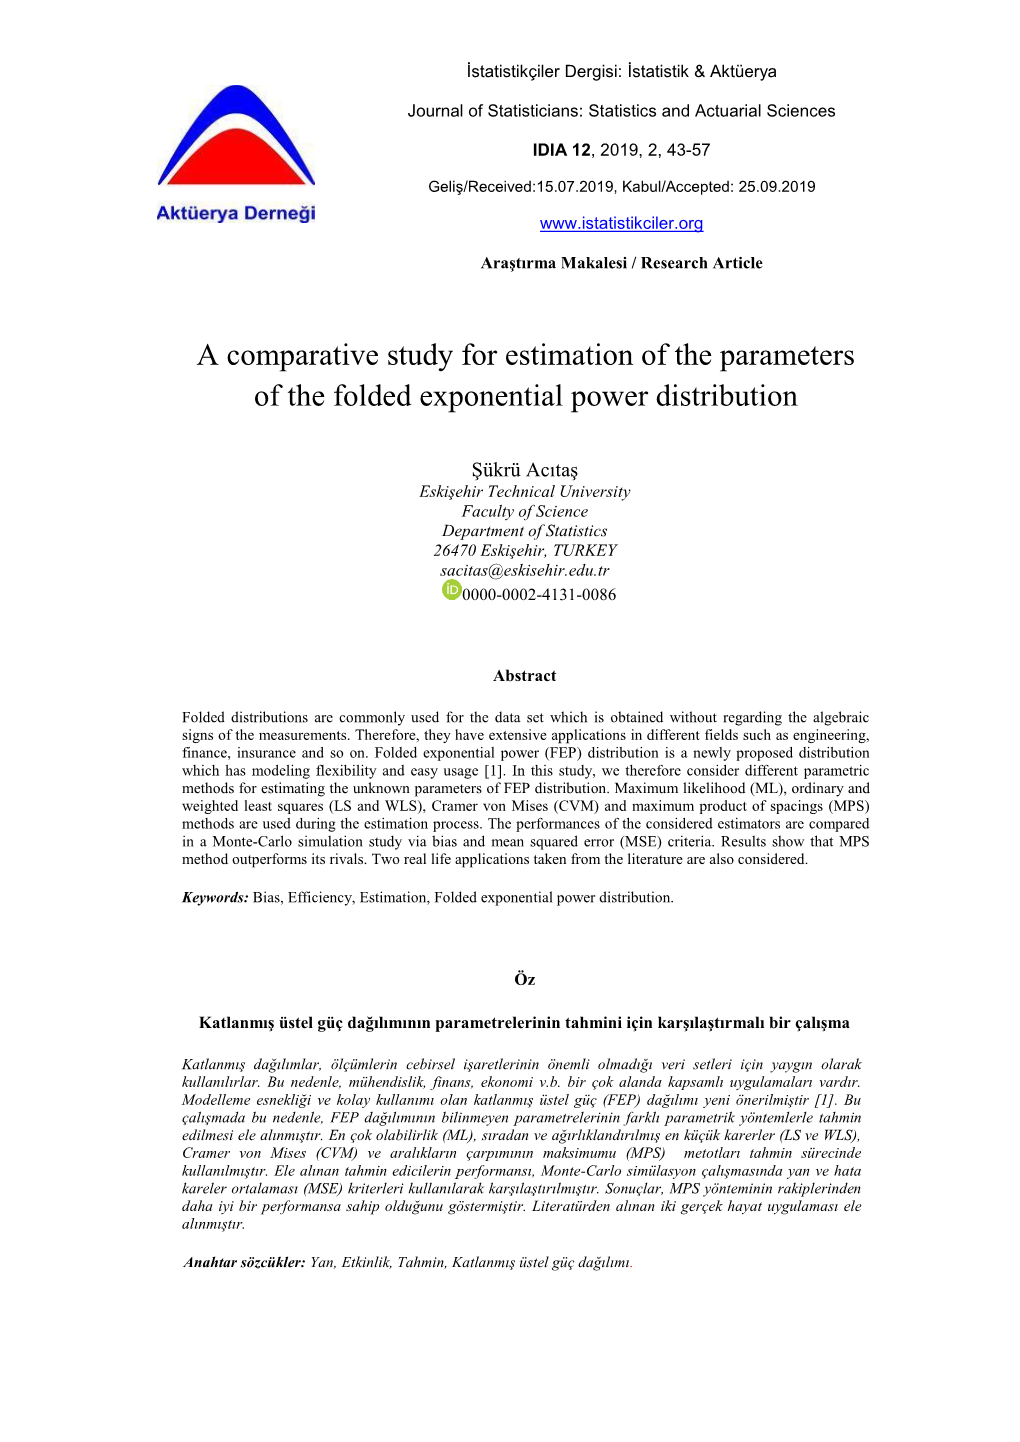 A Comparative Study for Estimation of the Parameters of the Folded Exponential Power Distribution